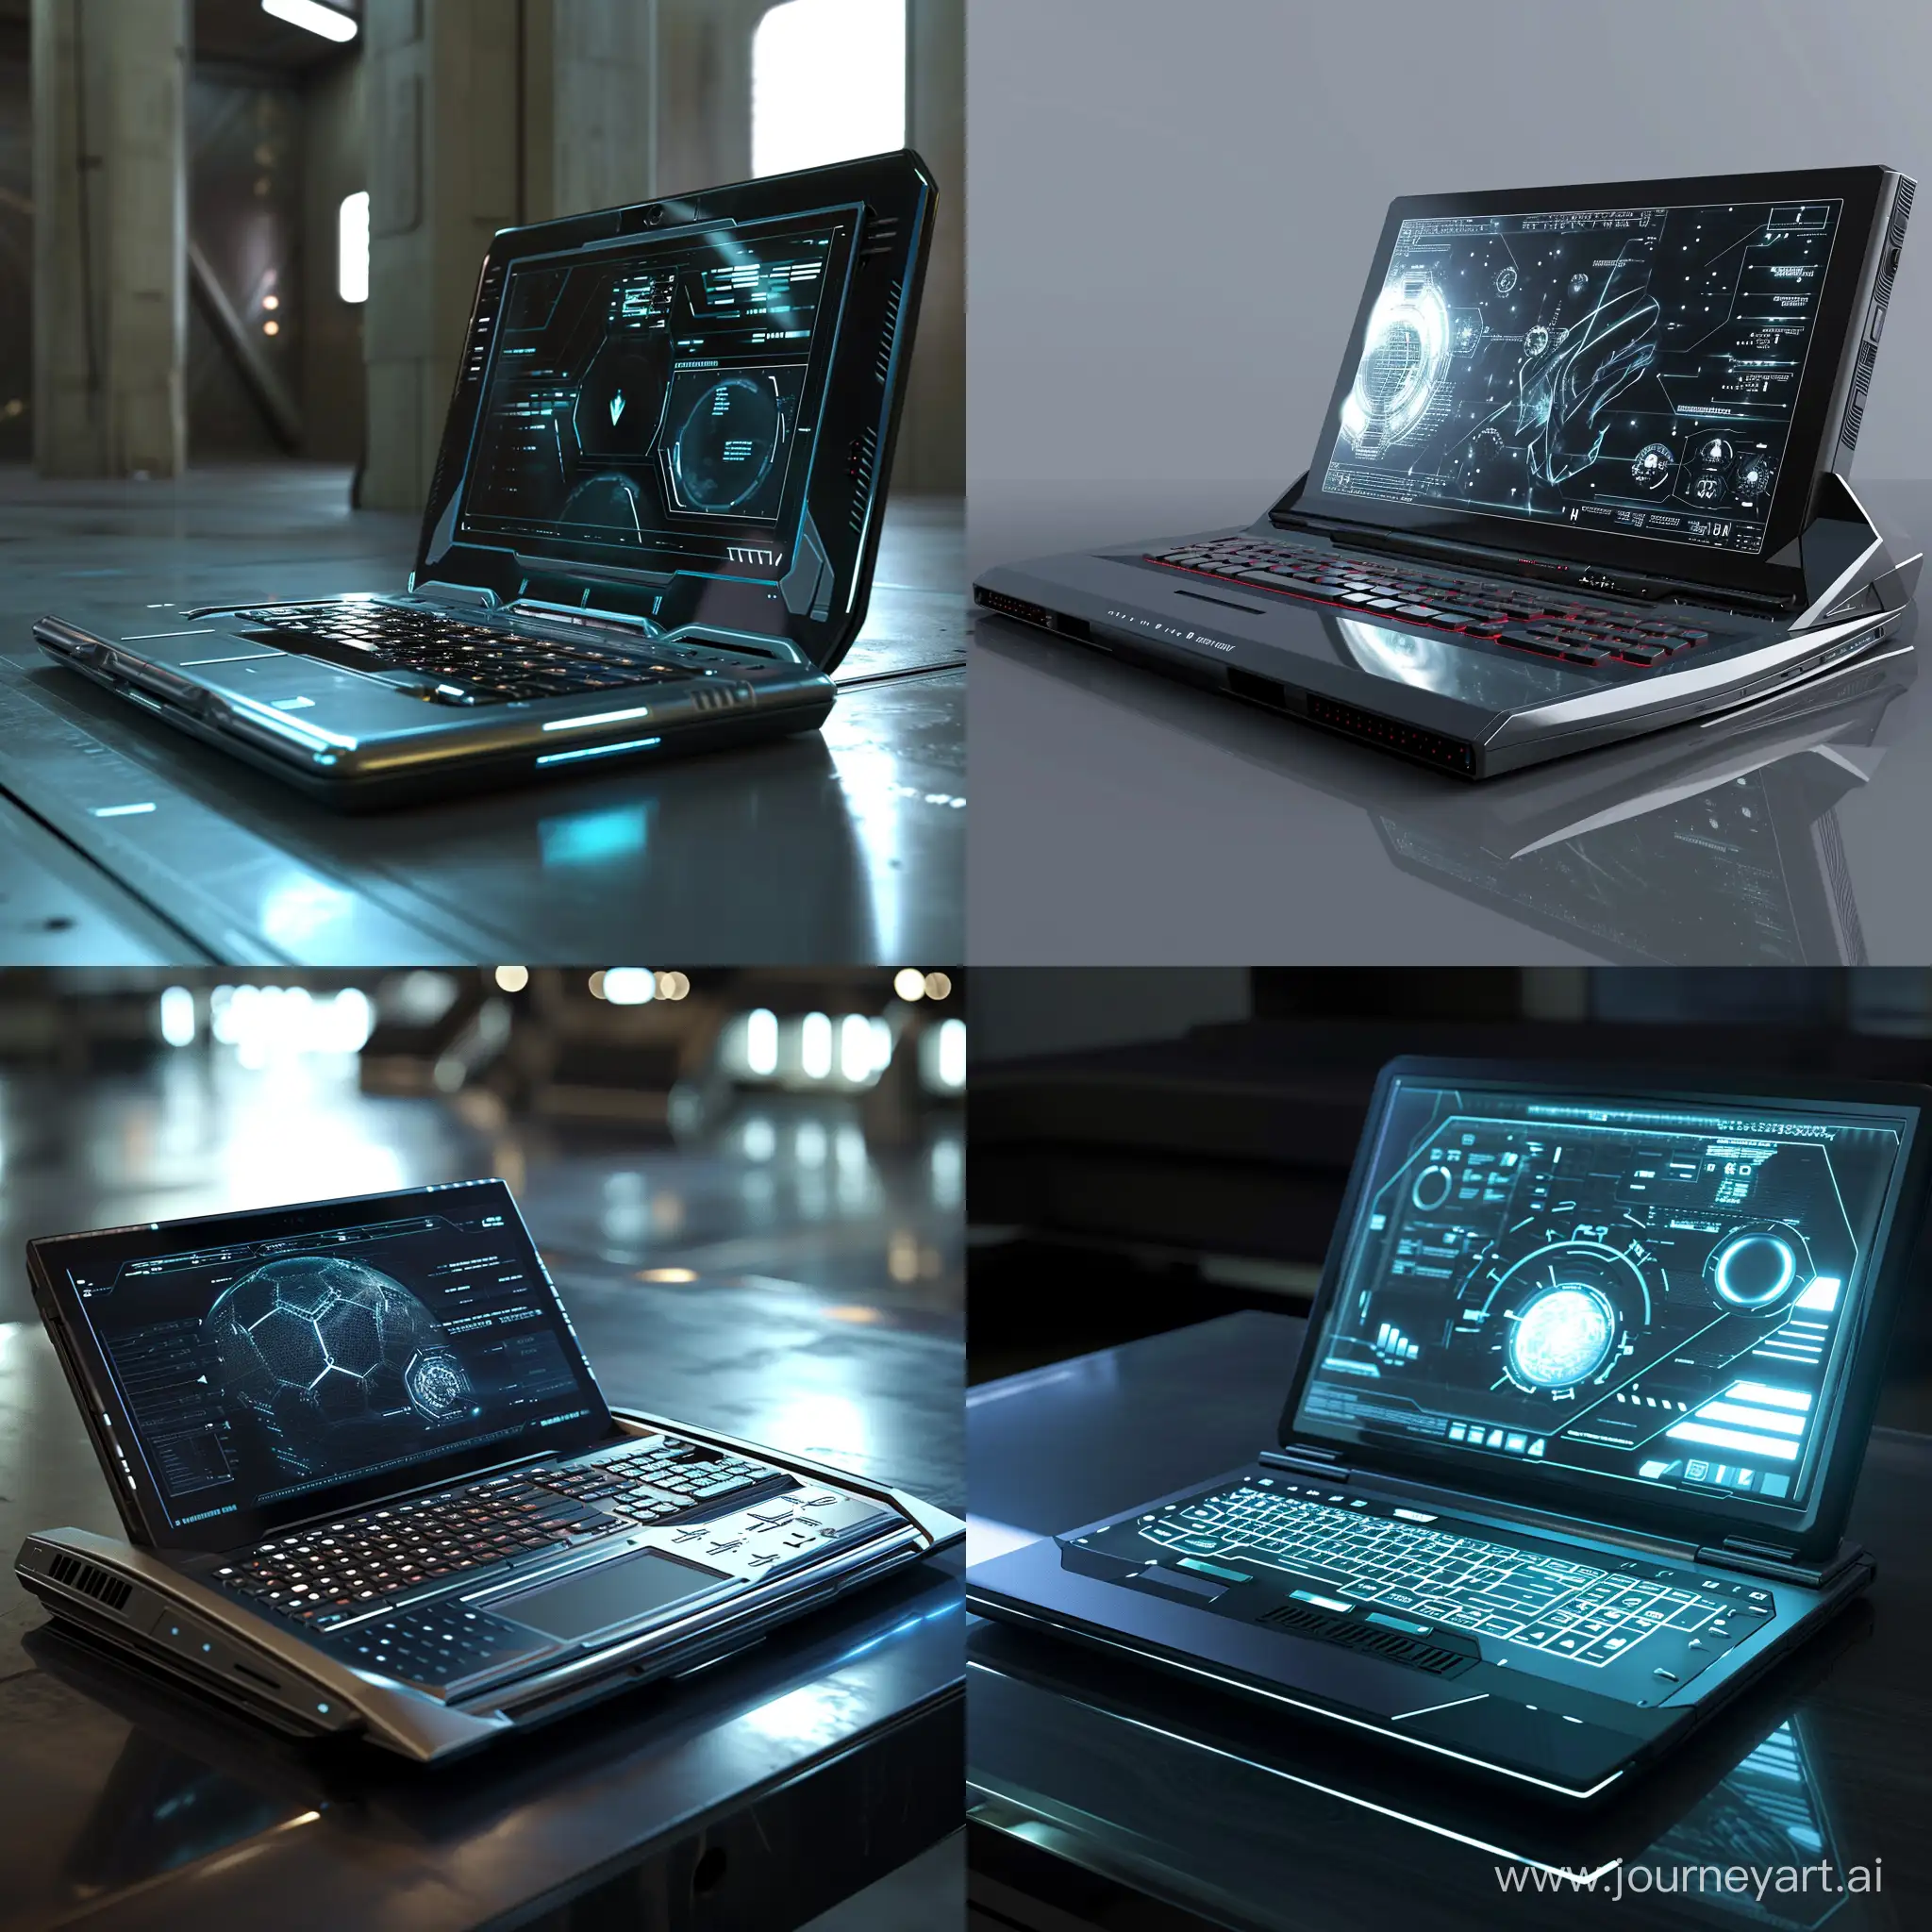 Futuristic-SciFi-Laptop-with-Holographic-Display-Technology